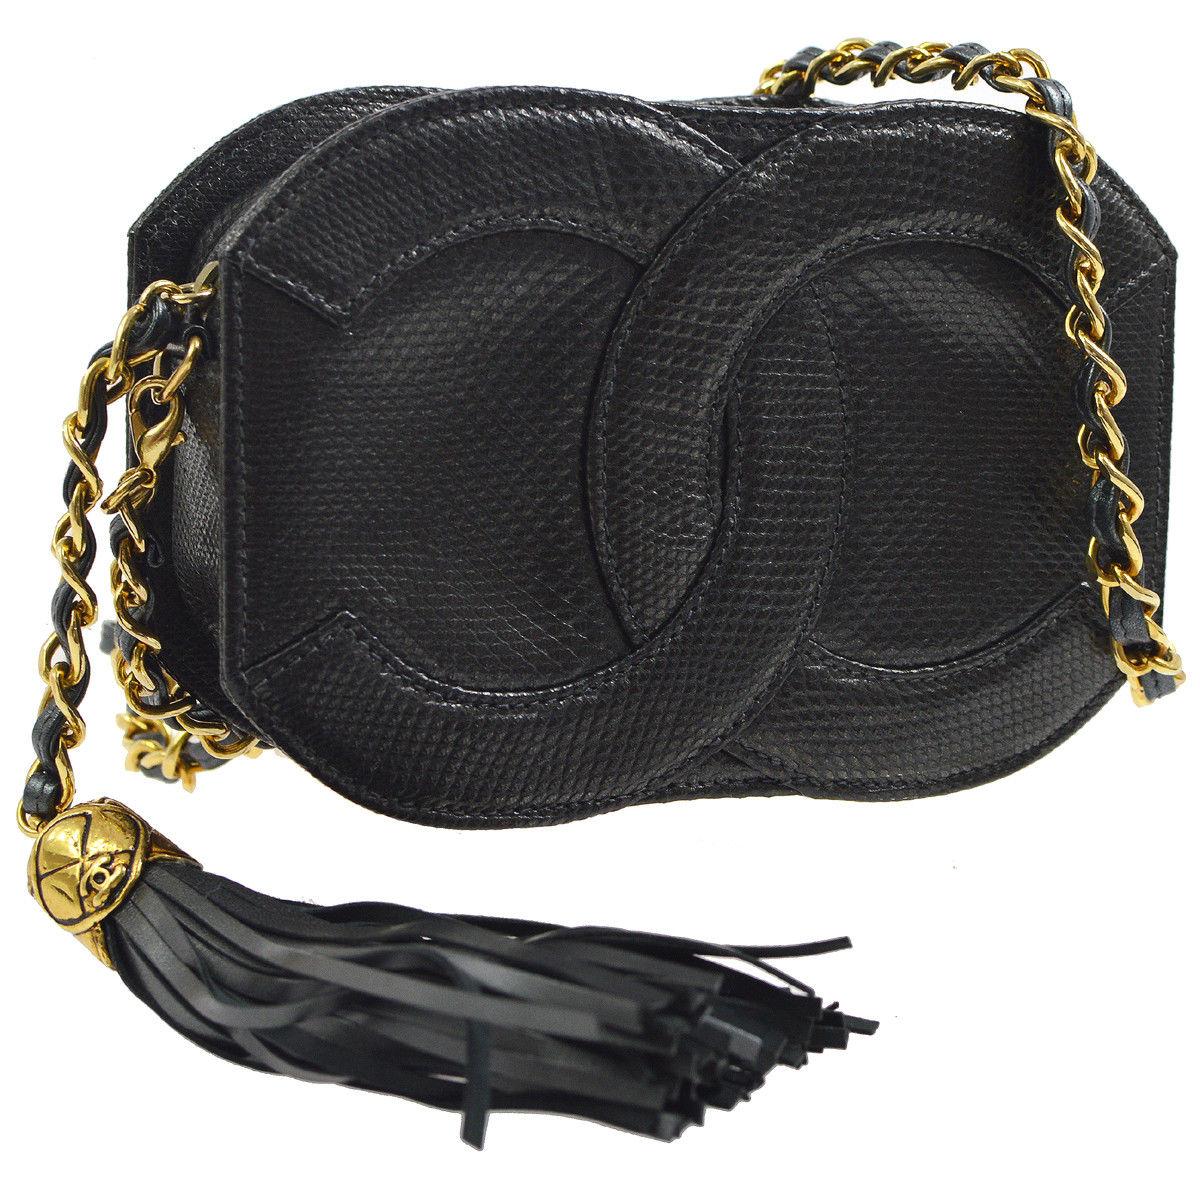 Black Chanel Rare Lizard Leather Gold Evening Small Party CC Shoulder Flap Bag